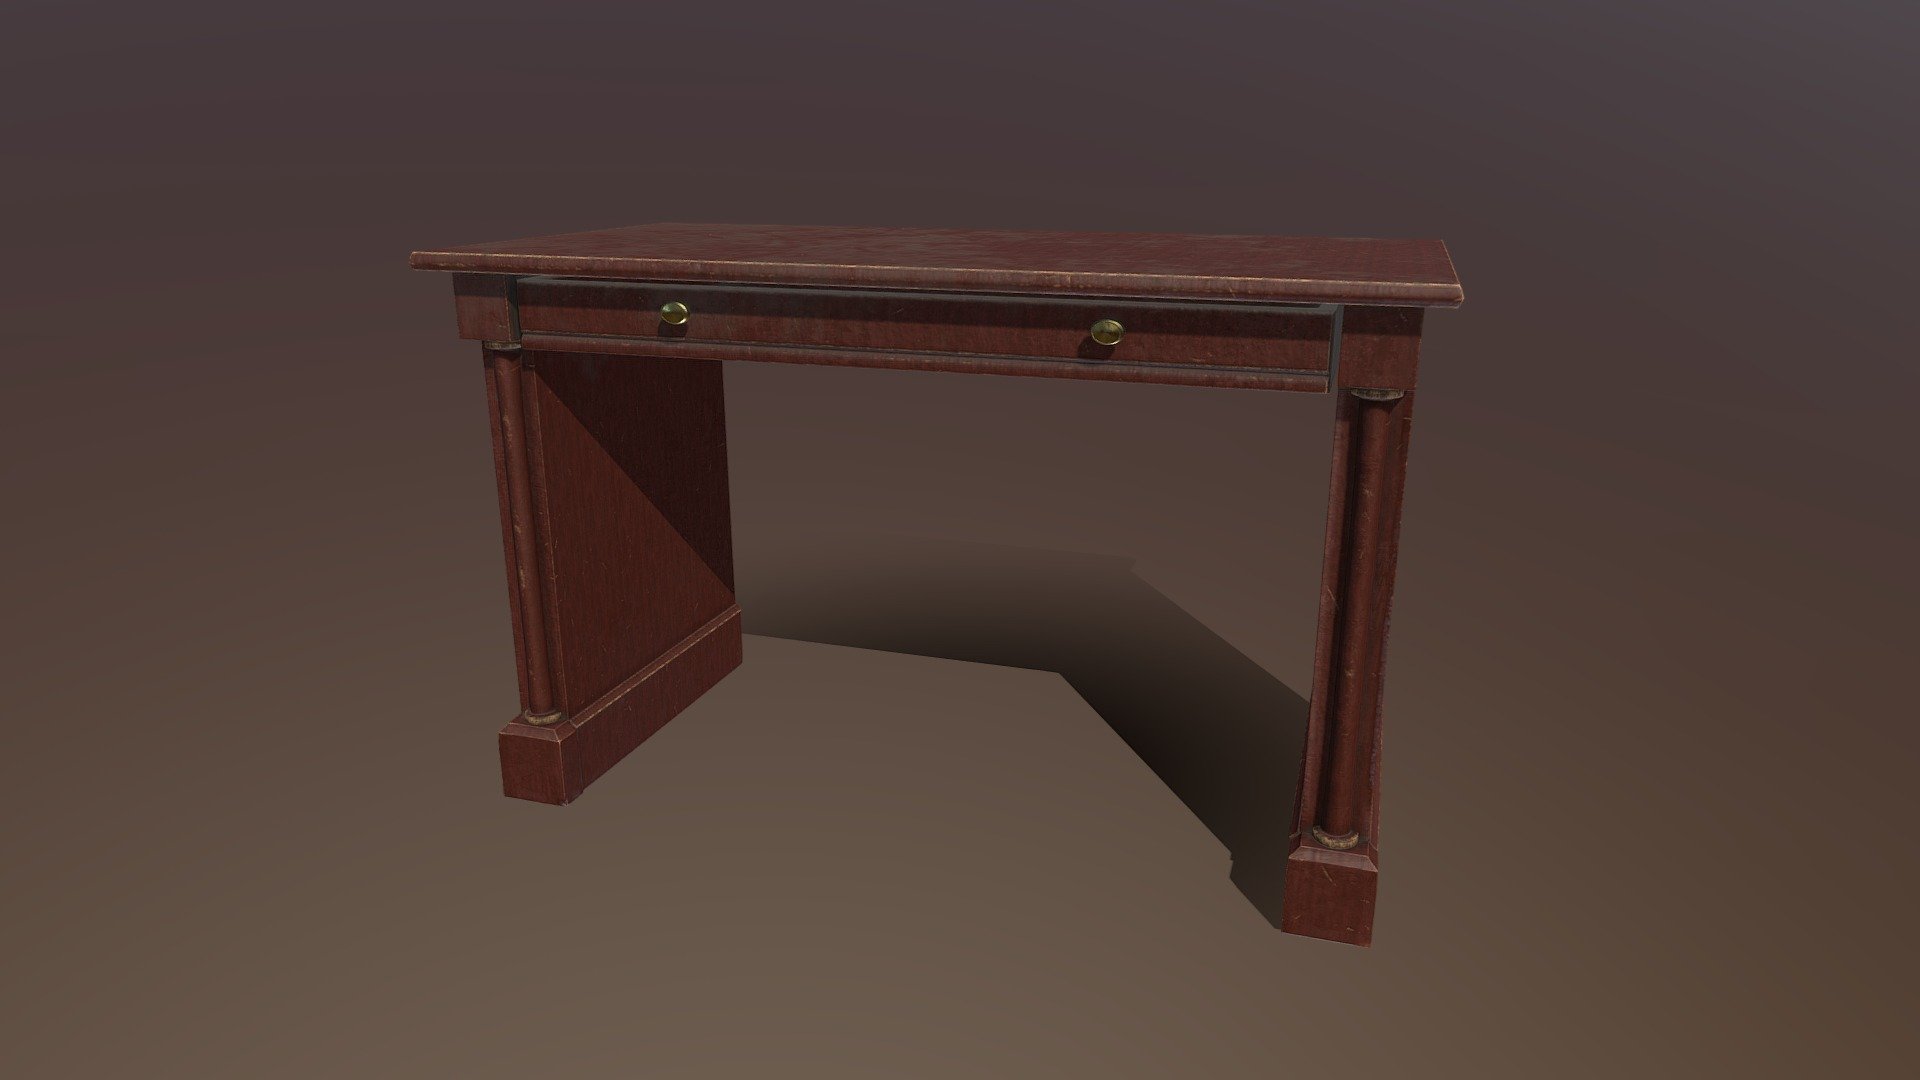 Old wooden desk made with professional standards.

Low poly and ready for a game environment, modeled to real world scale. Includes several file formats to use (fbx, ma, obj, stl) along with Basecolor, Normal, Metallic, Roughness, and ORM maps at 1k, 2k, and 4k resolution 3d model